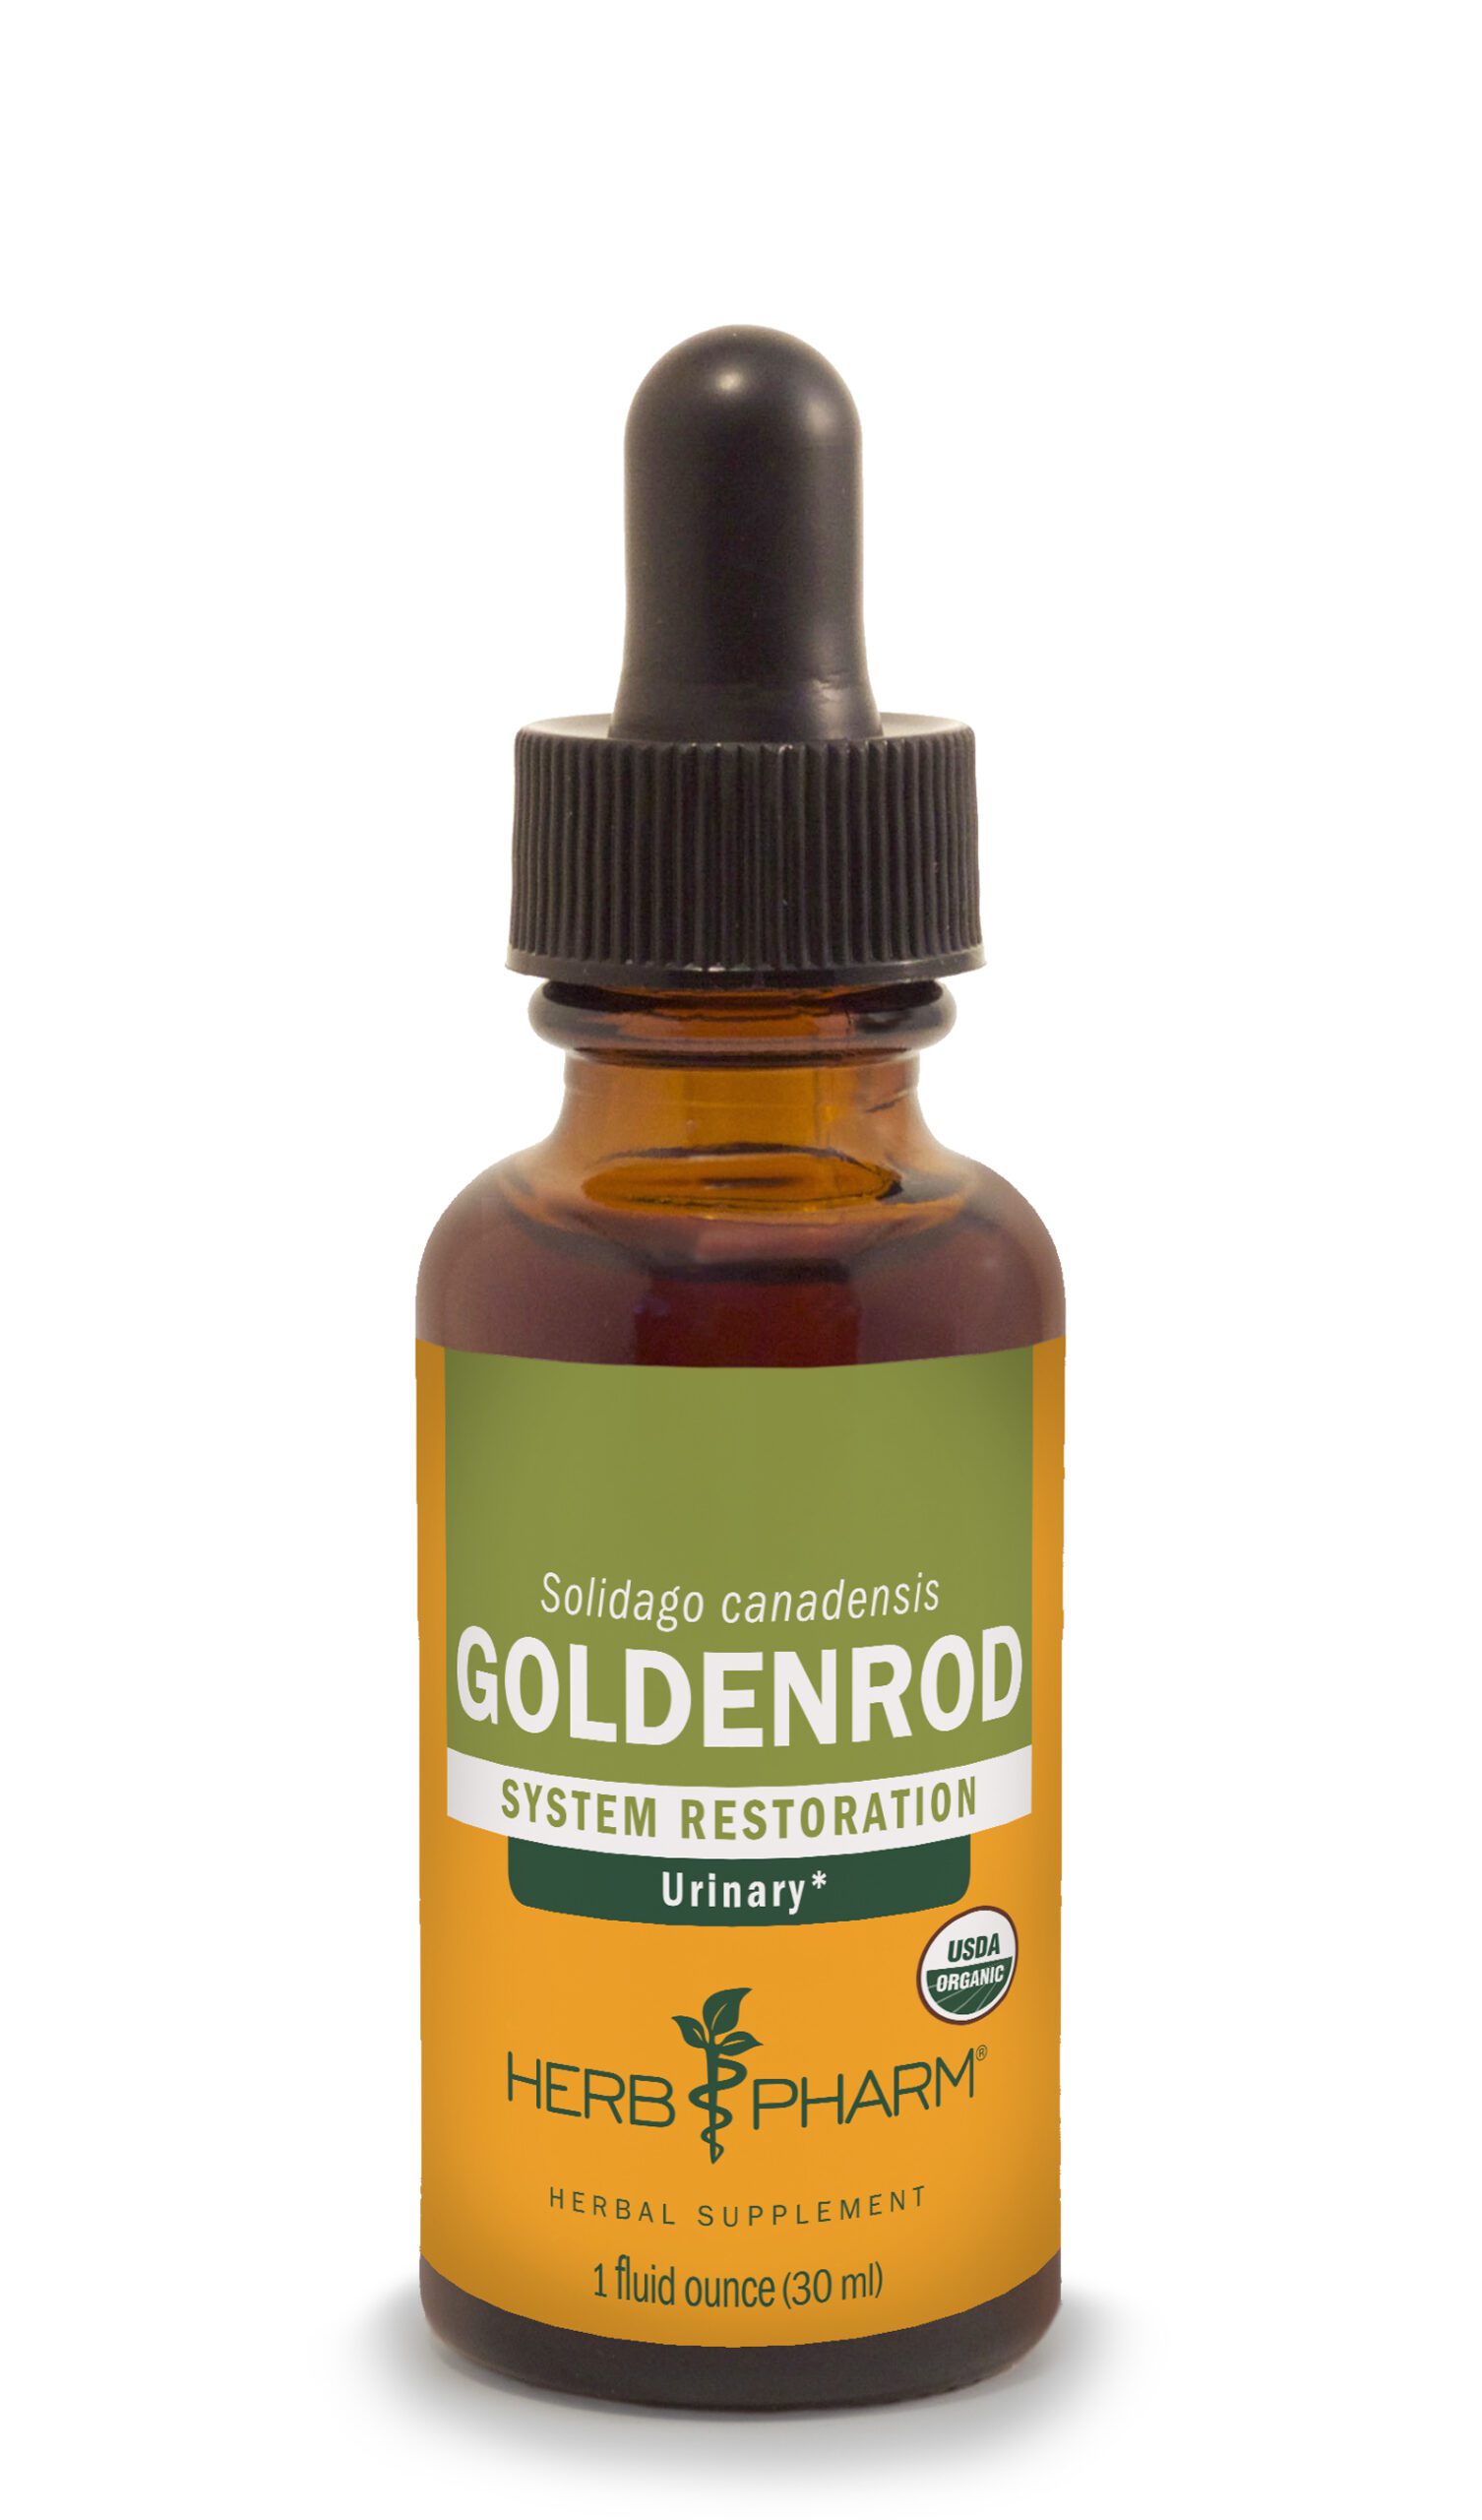 Product Listing Image for Herb Pharm Goldenrod Tincture 1oz